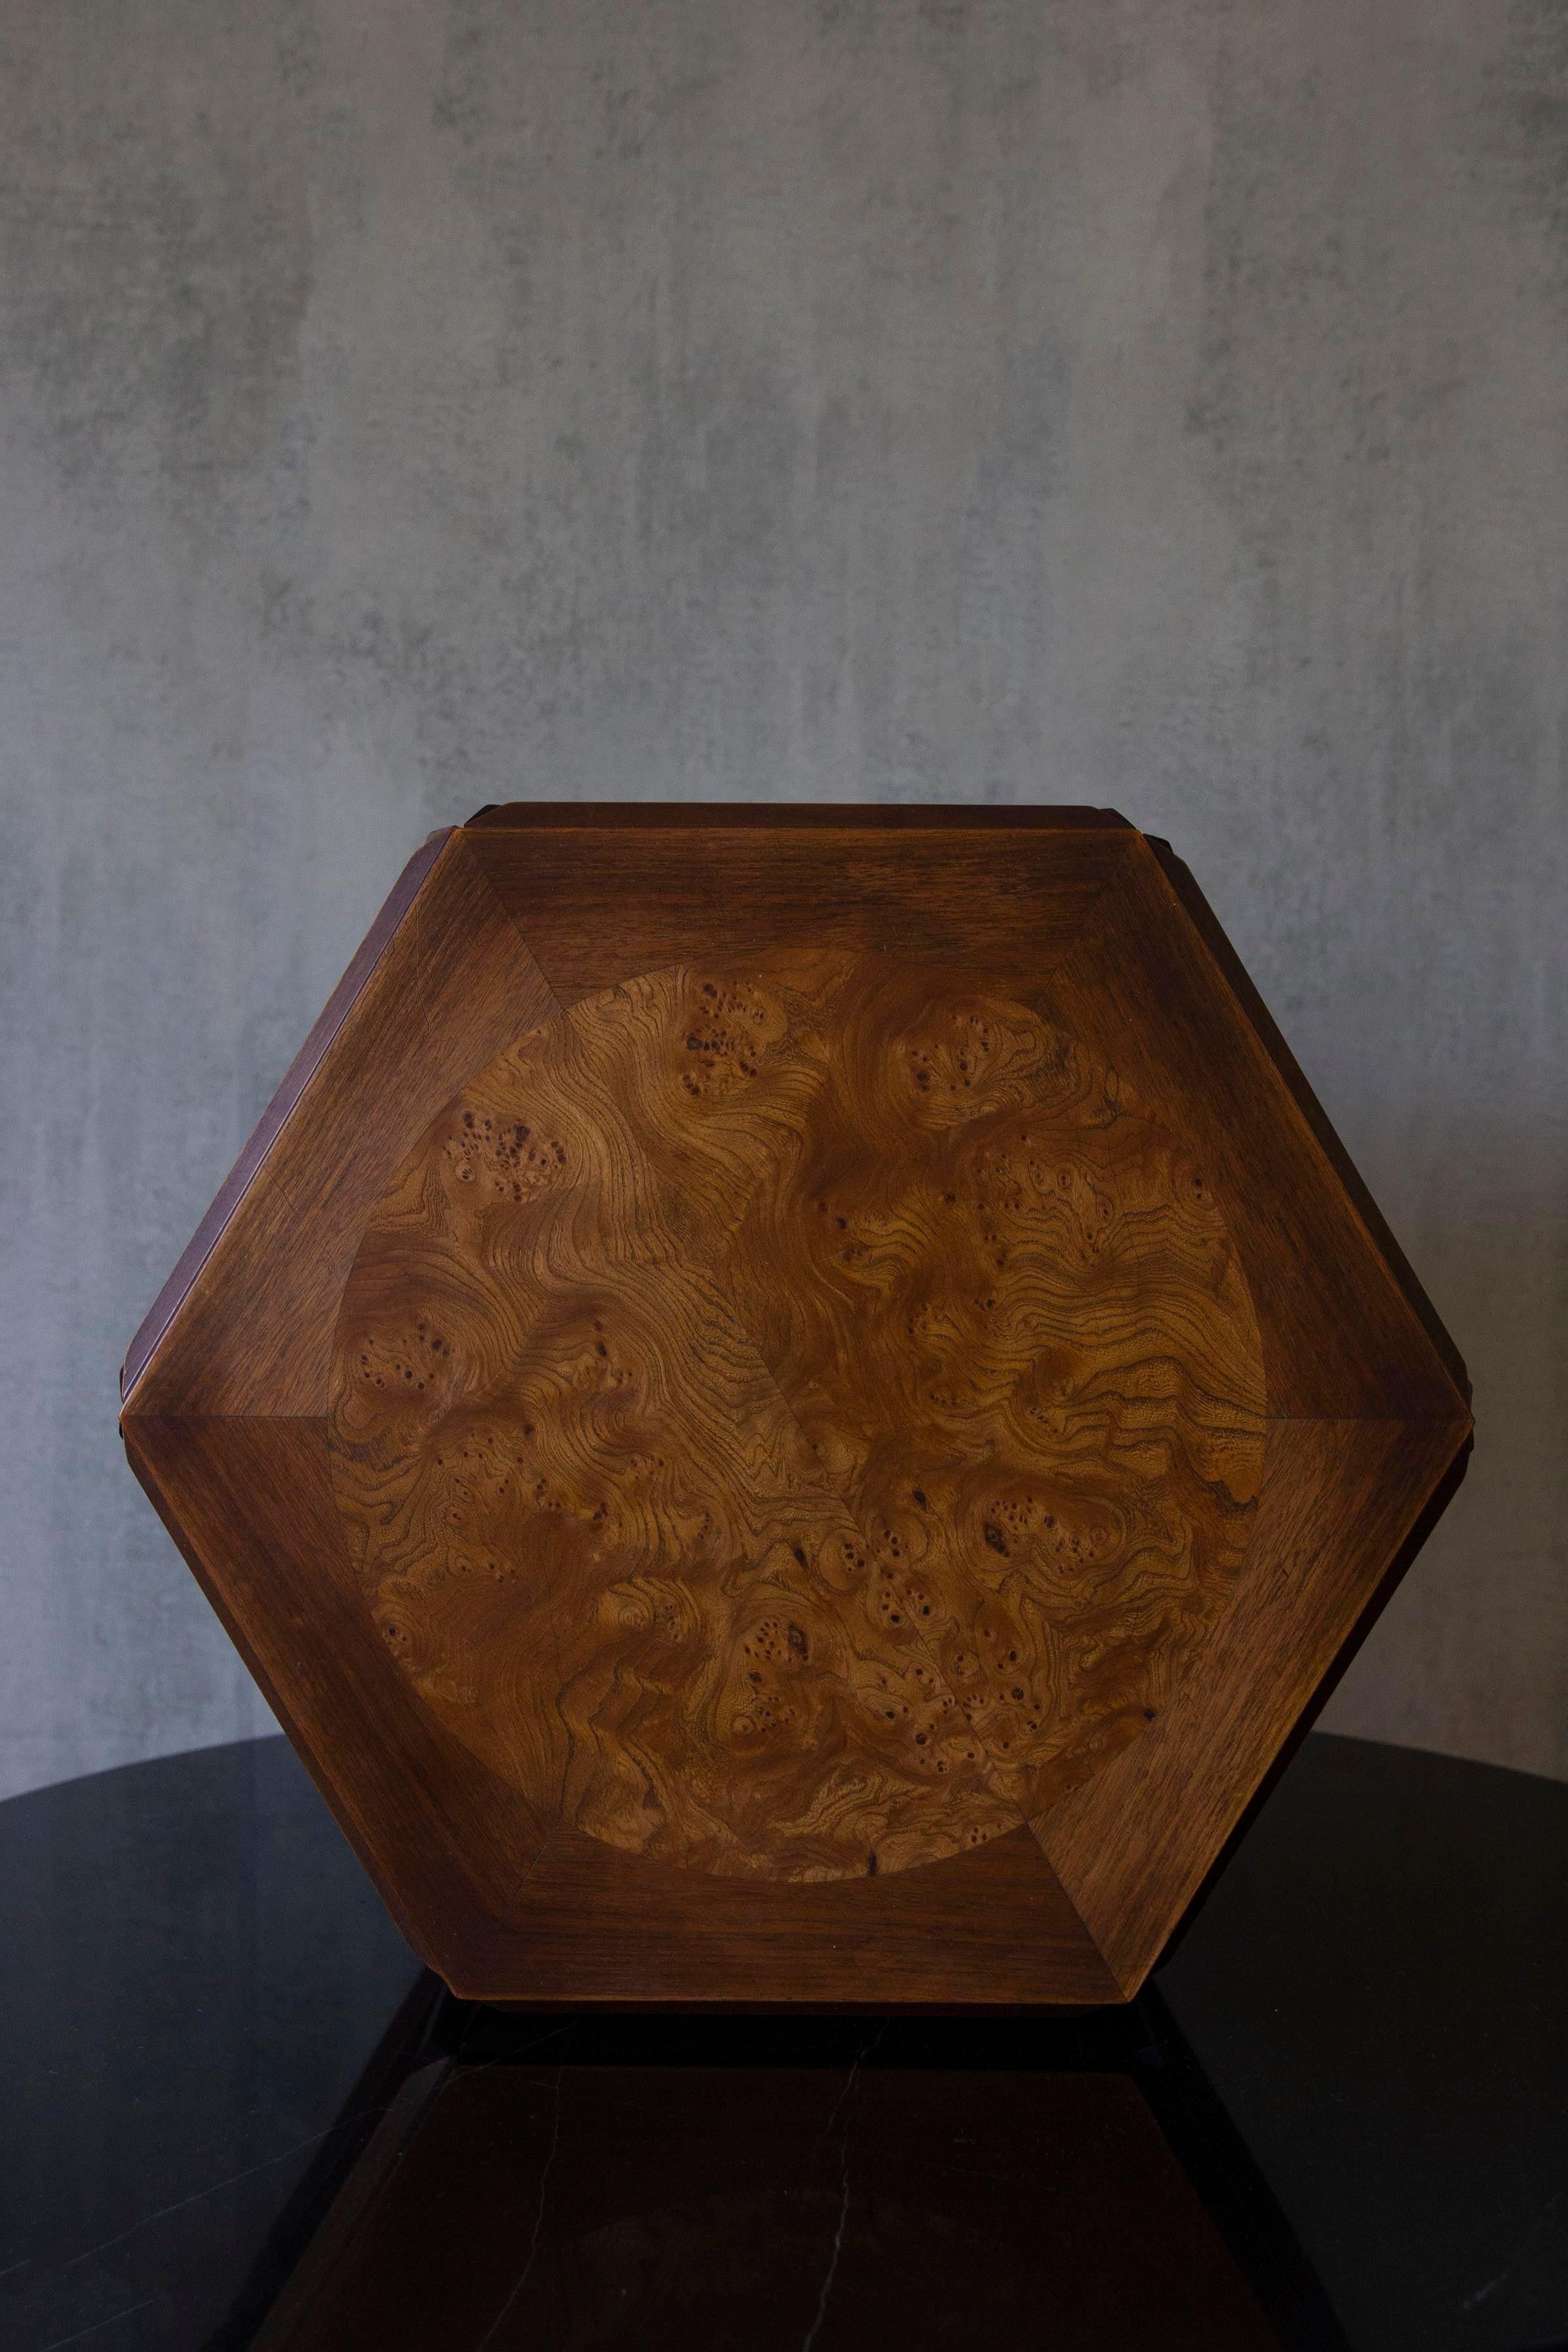 Pair of John Keal for Brown Saltman burl wood hexagon side tables. Also great together as a small coffee tables. Angled corners, lower shelves, black platforms, beautiful wood grain, original label, and sleek sculptural form. Circa Mid 20th Century.